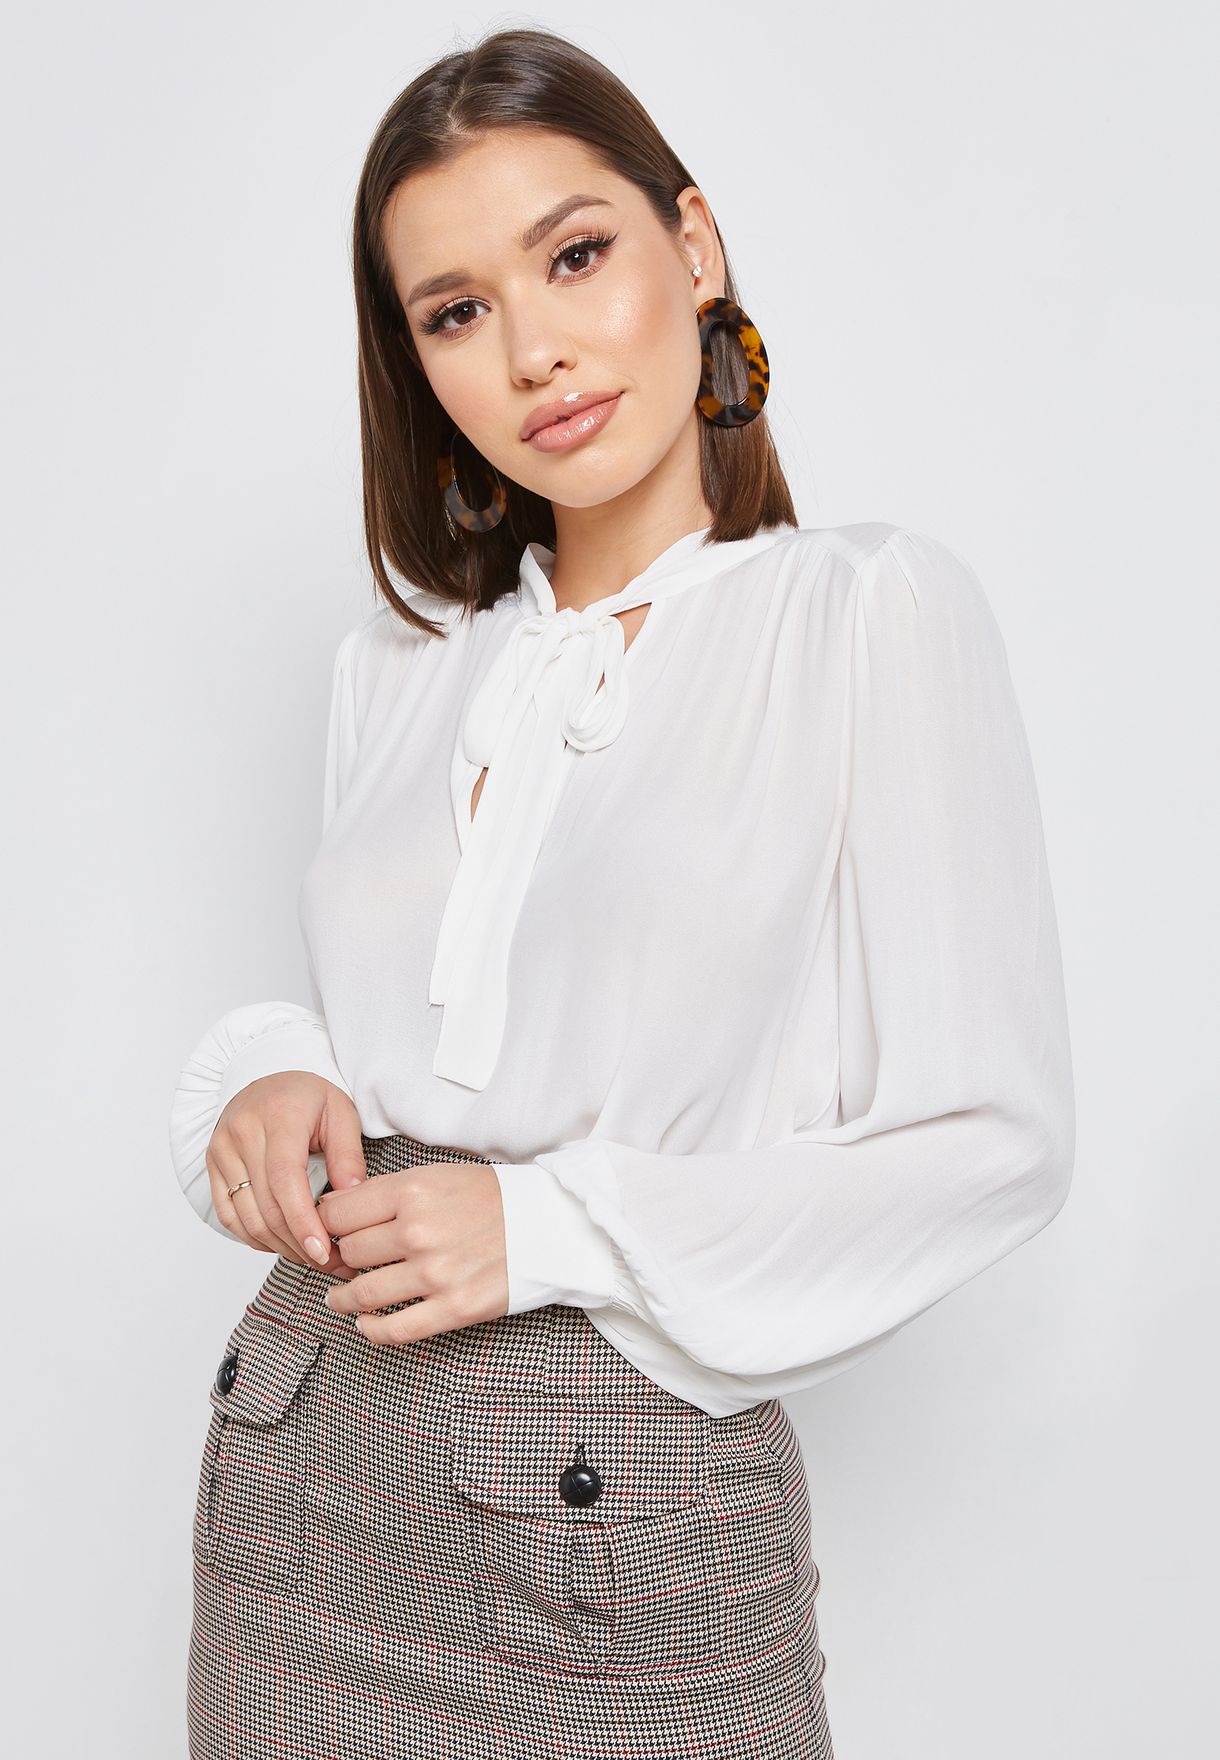 tie neck blouse forever 21